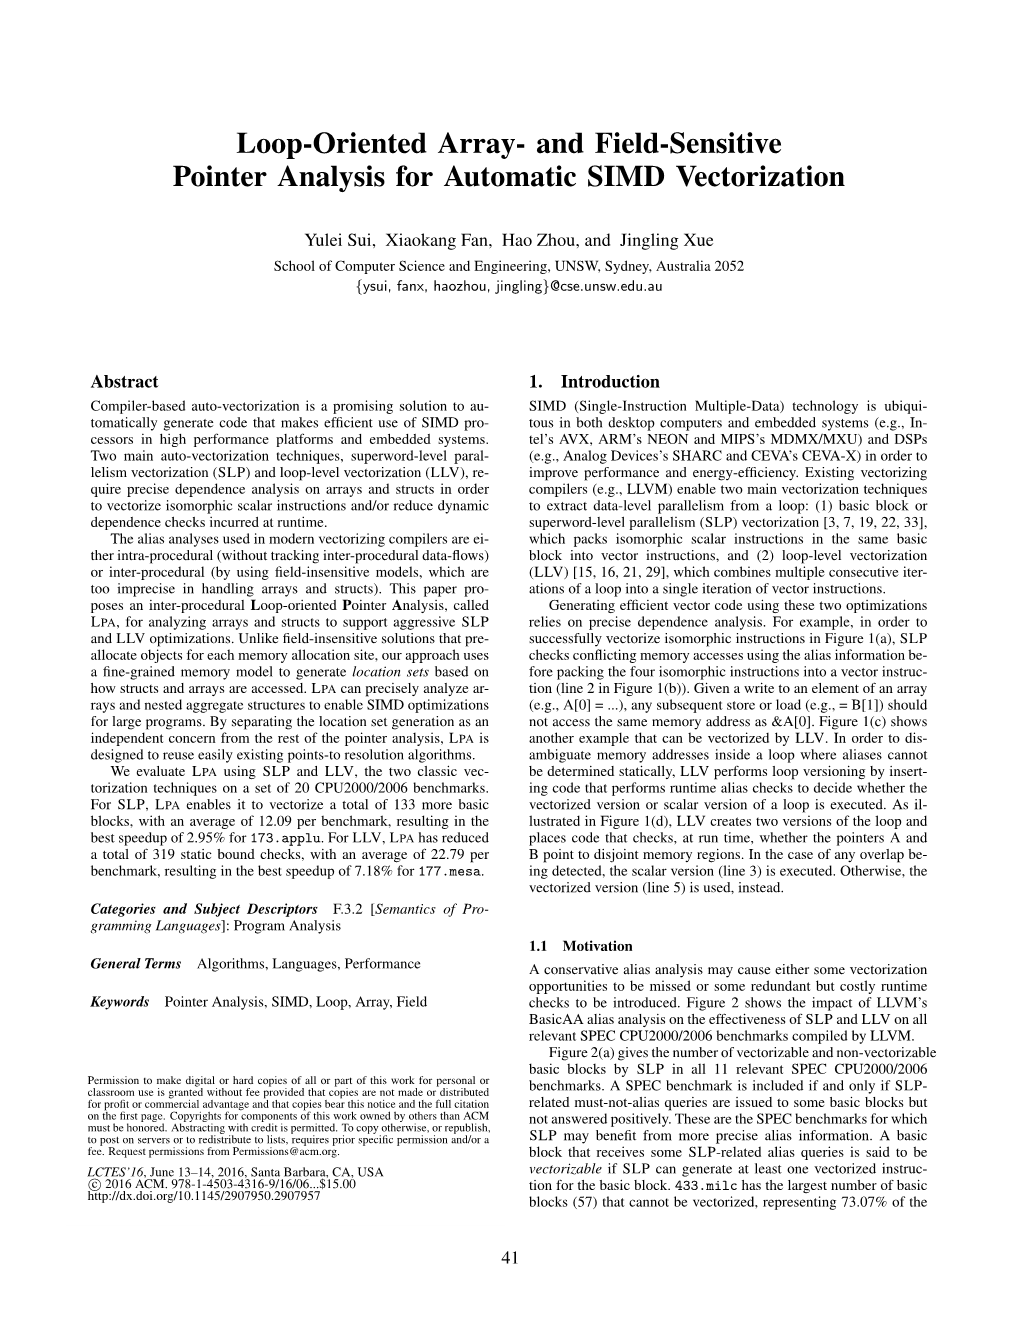 Loop-Oriented Array- and Field-Sensitive Pointer Analysis for Automatic SIMD Vectorization